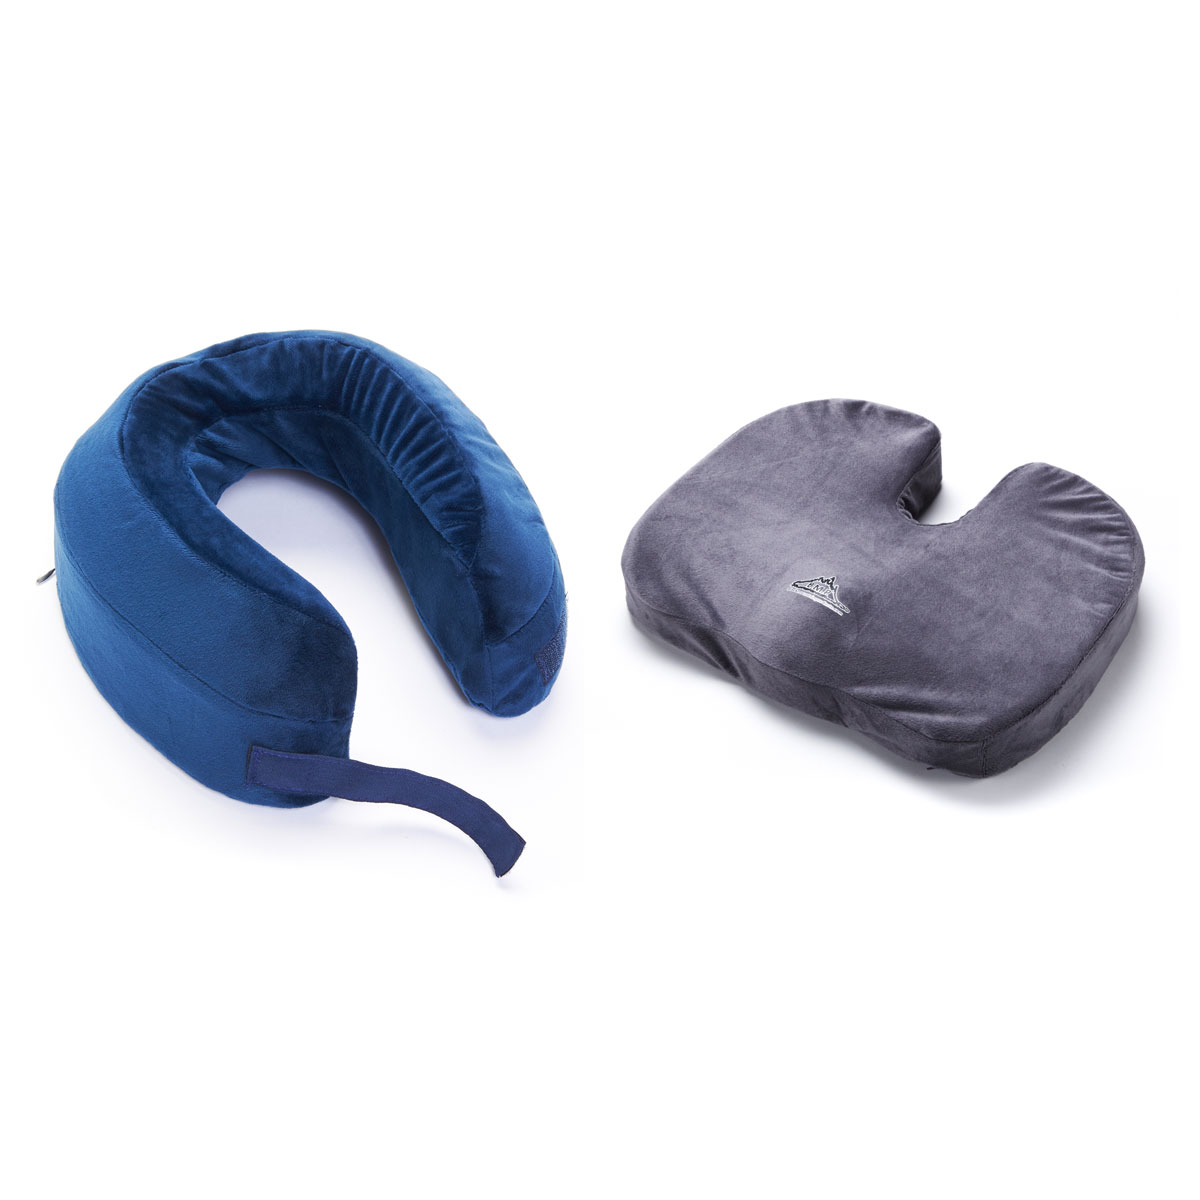 Orthopedic Memory Foam Seat Cushion with Supporting Neck Pillow